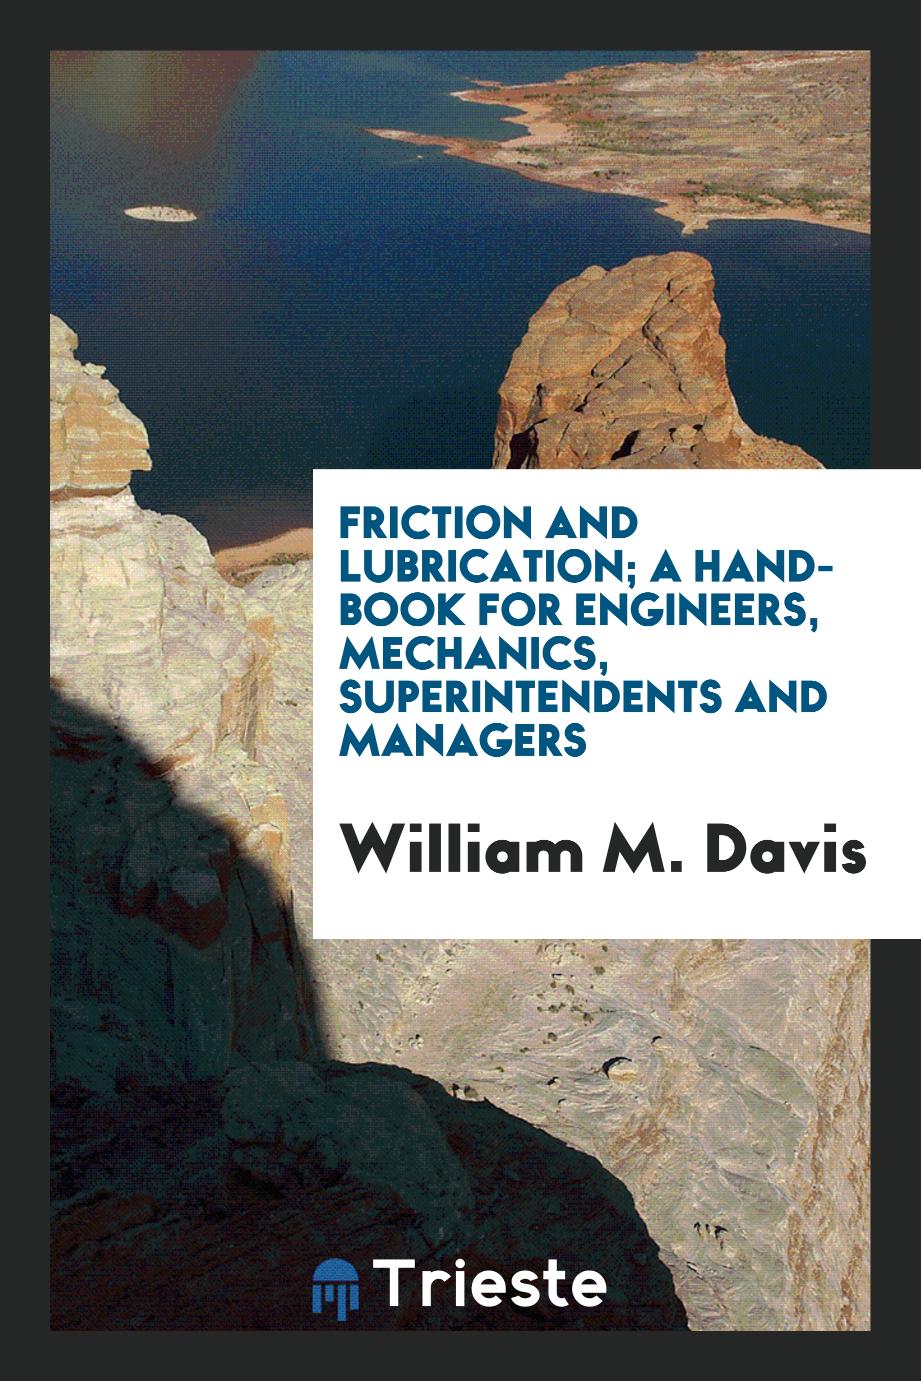 Friction and lubrication; a hand-book for engineers, mechanics, superintendents and managers